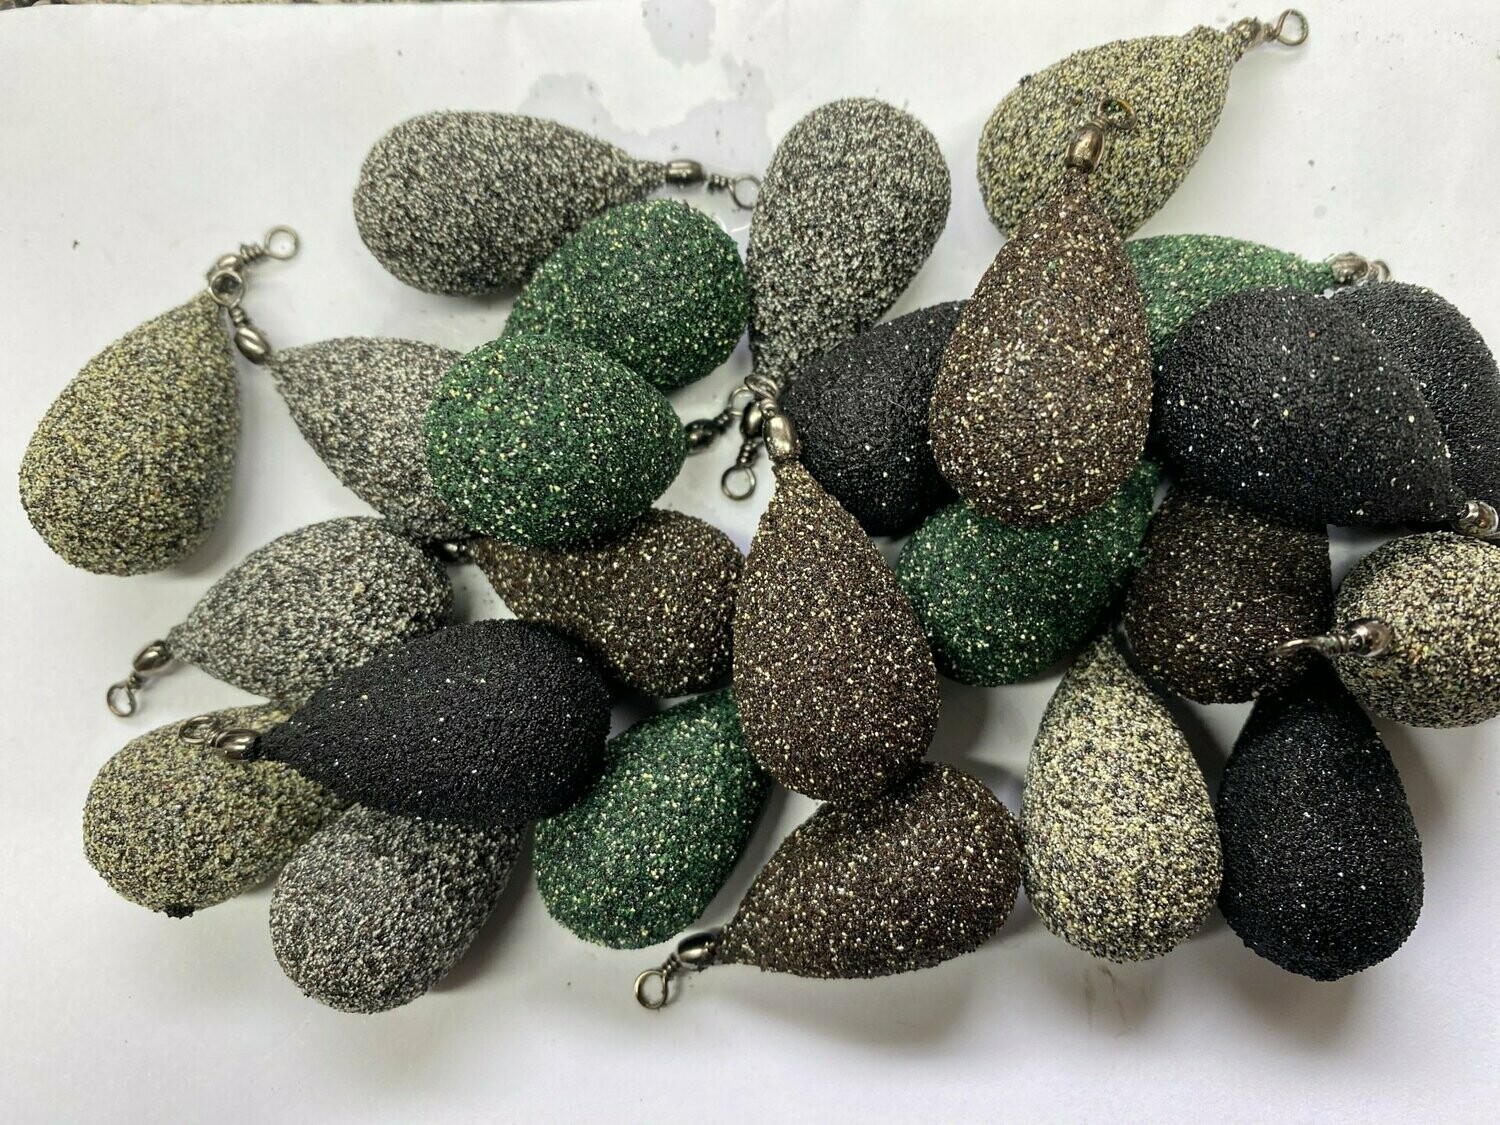 2 oz. Pears fitted with barrel swivels LEAD WEIGHTS SINKERS textured smooth  Sea/Carp fishing tackle (sold in pack of 60) free postage